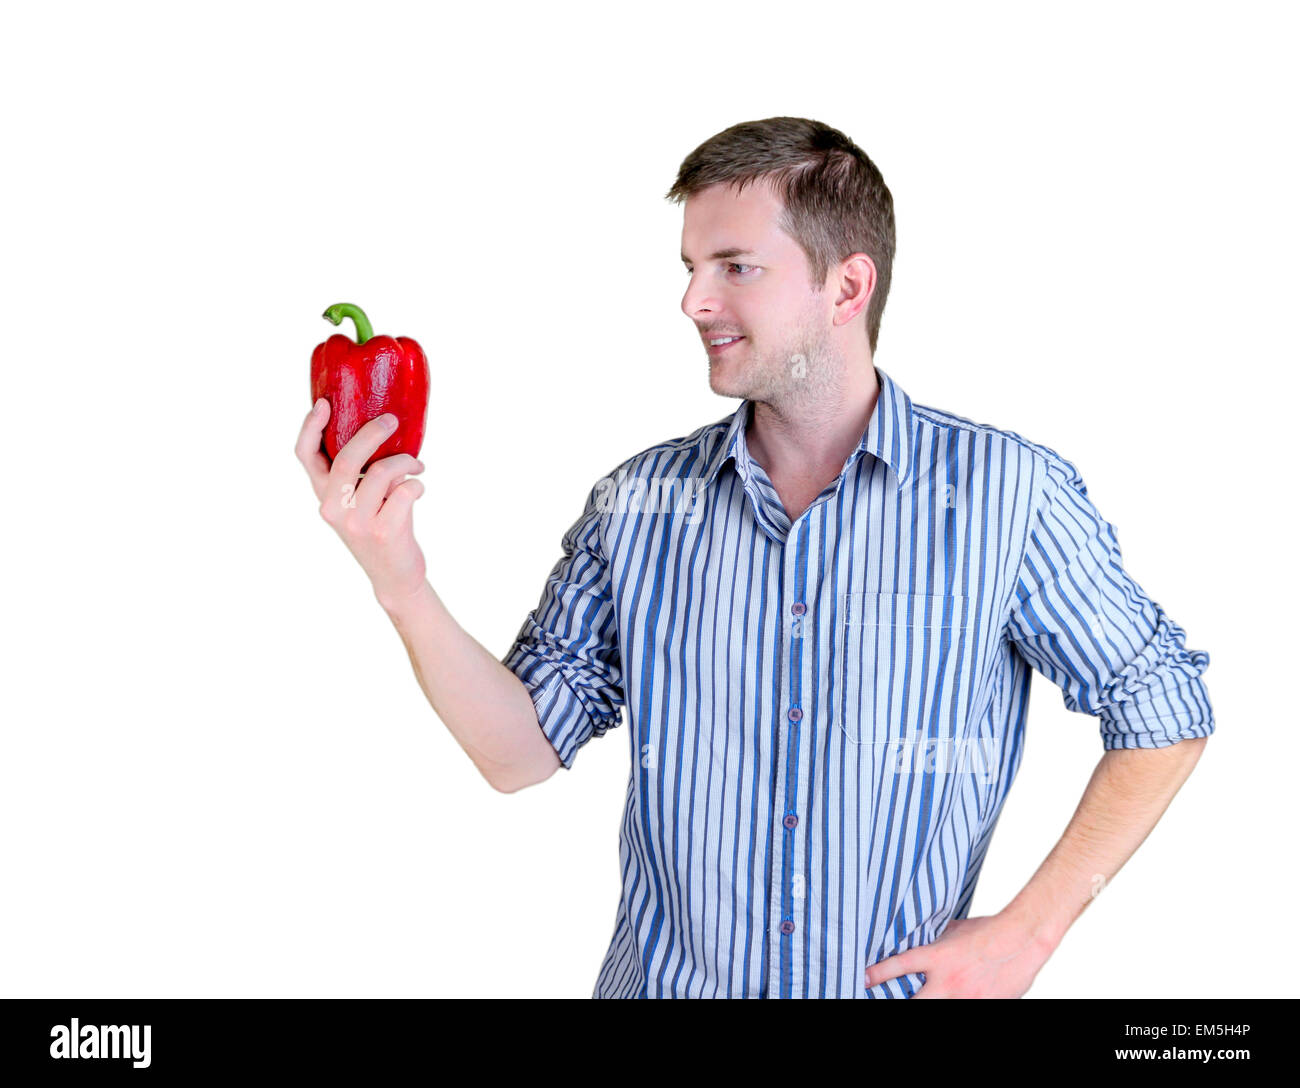 Red Bell Pepper Stock Photo